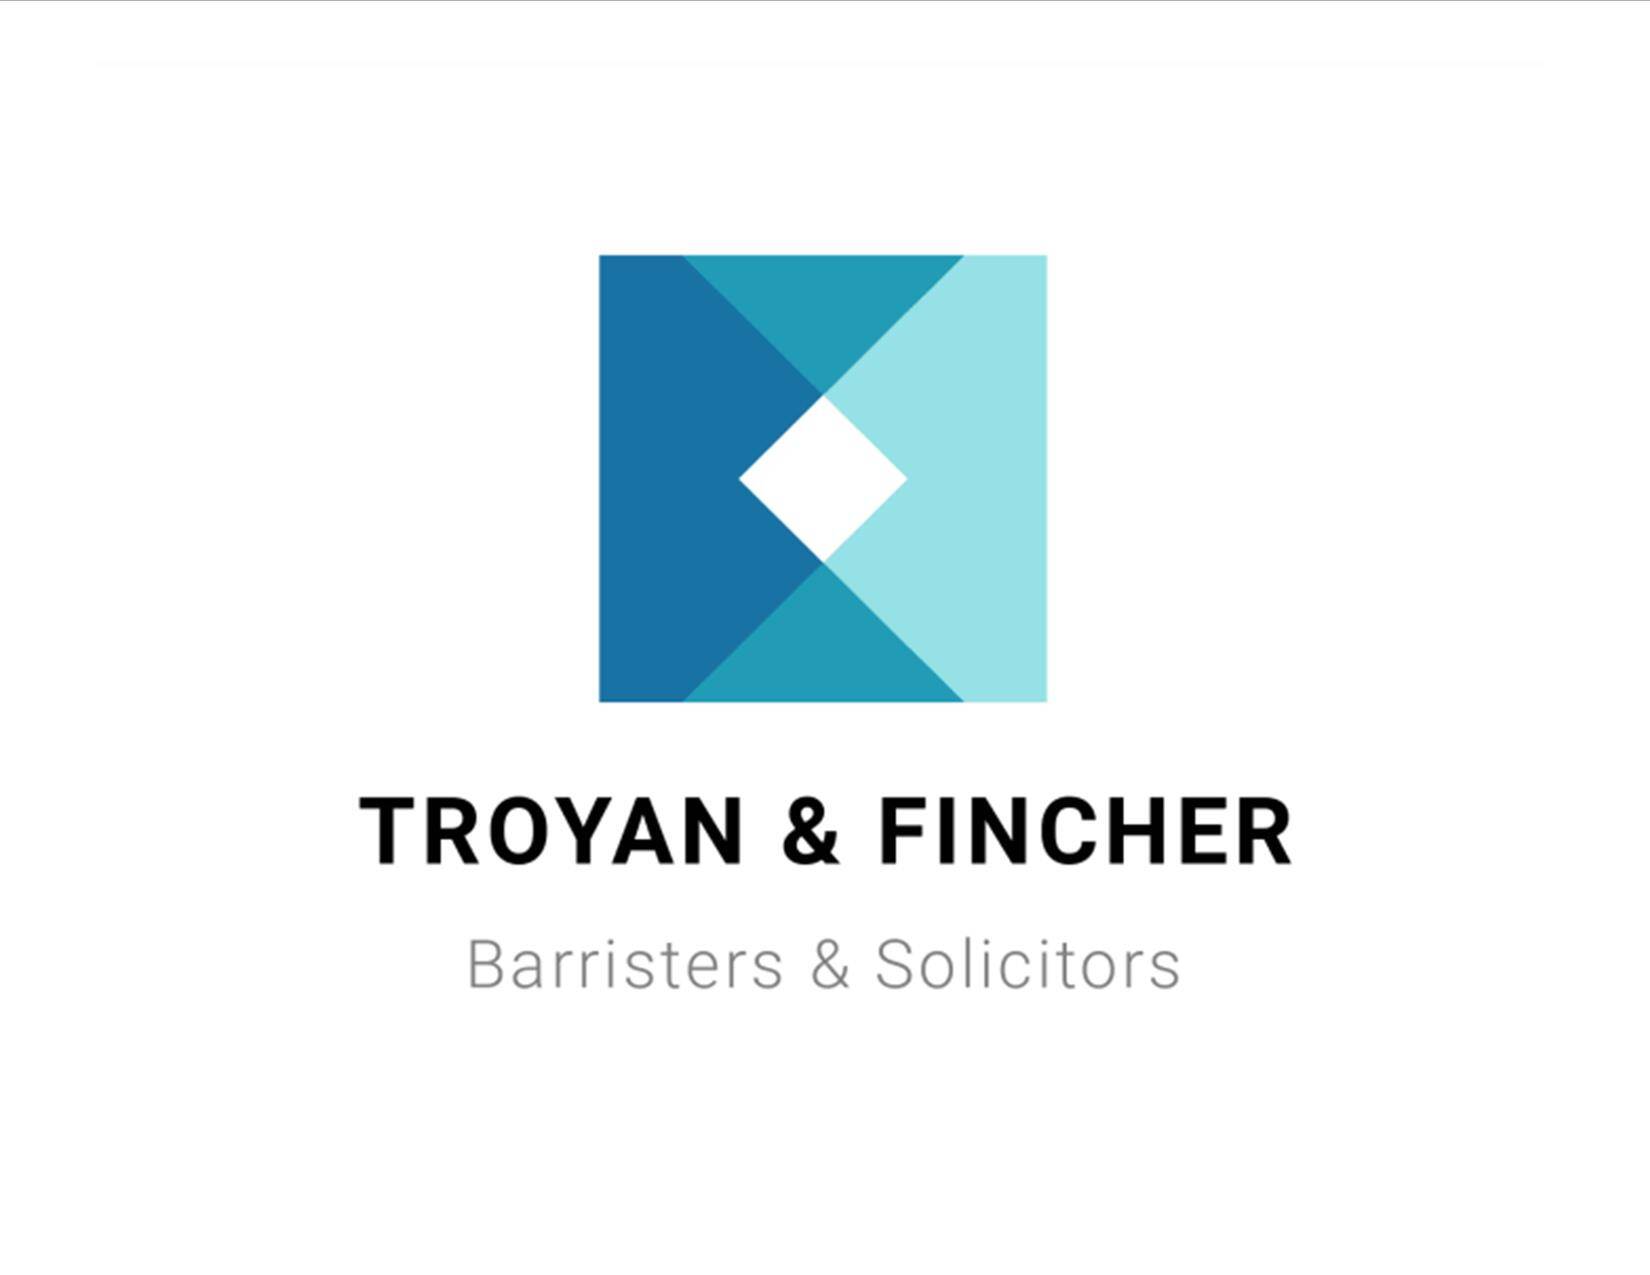 Troyan & Fincher Barristers & Solicitors